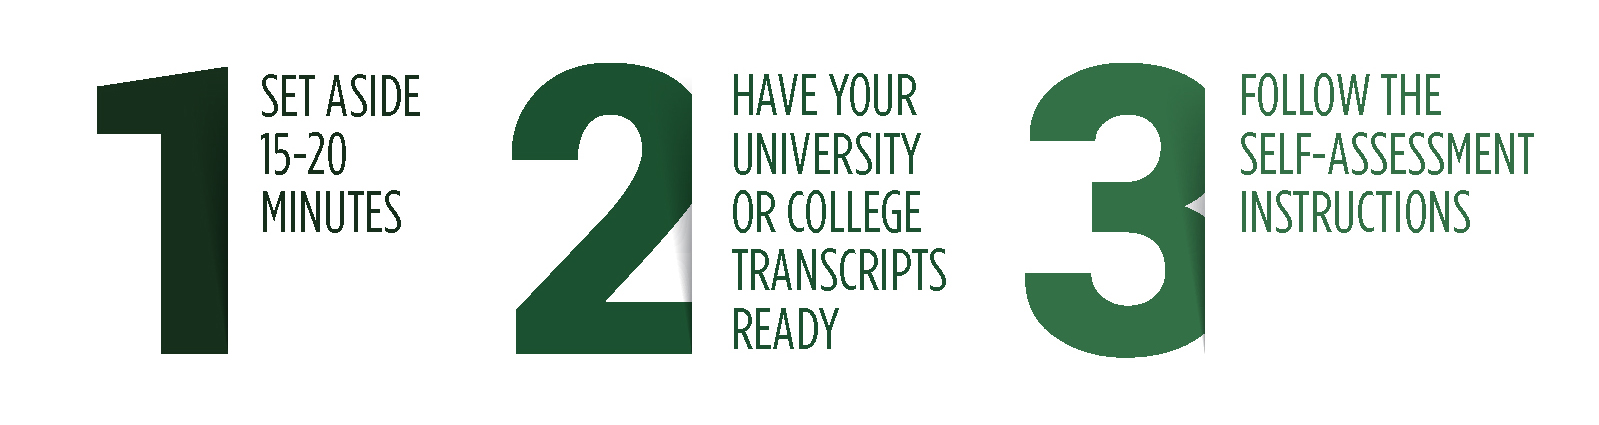 Step 1: Set aside 15-20 minutes. Step 2: Have your university or college transcripts ready. Step 3: Follow the self-assessment instructions.